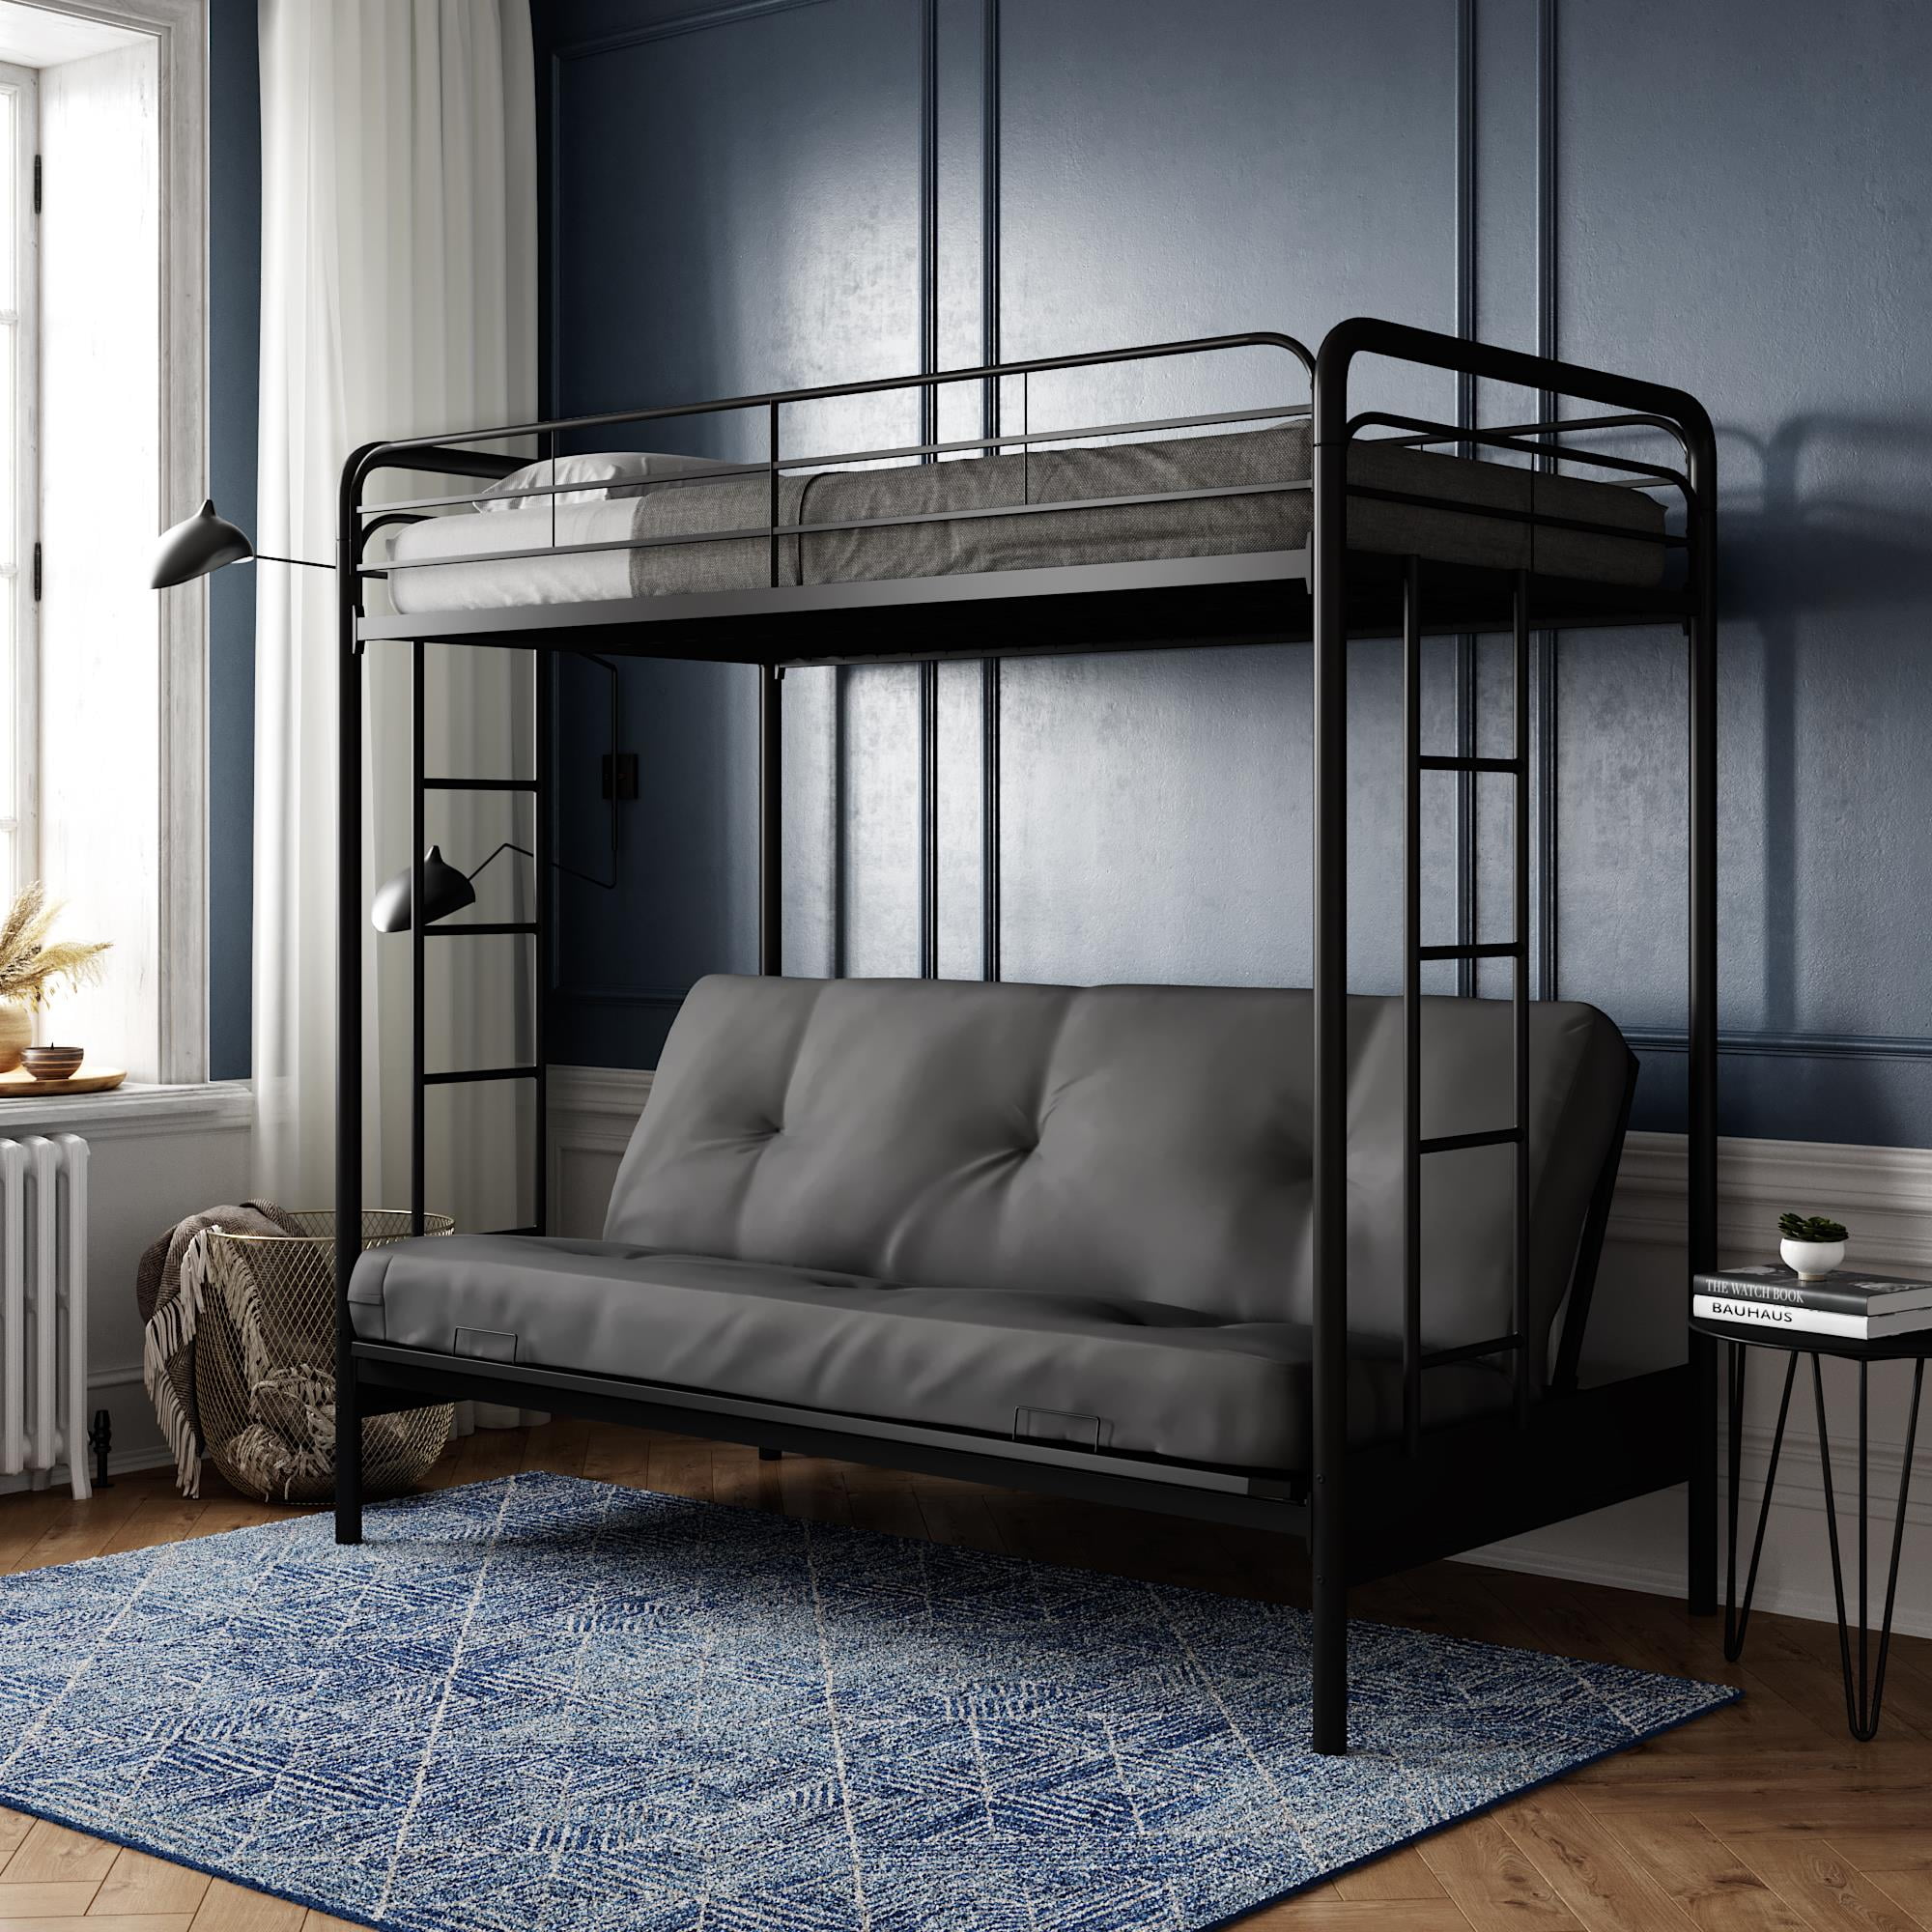 Twin Over Futon Bunk Bed Multiple, Black Futon Bunk Bed